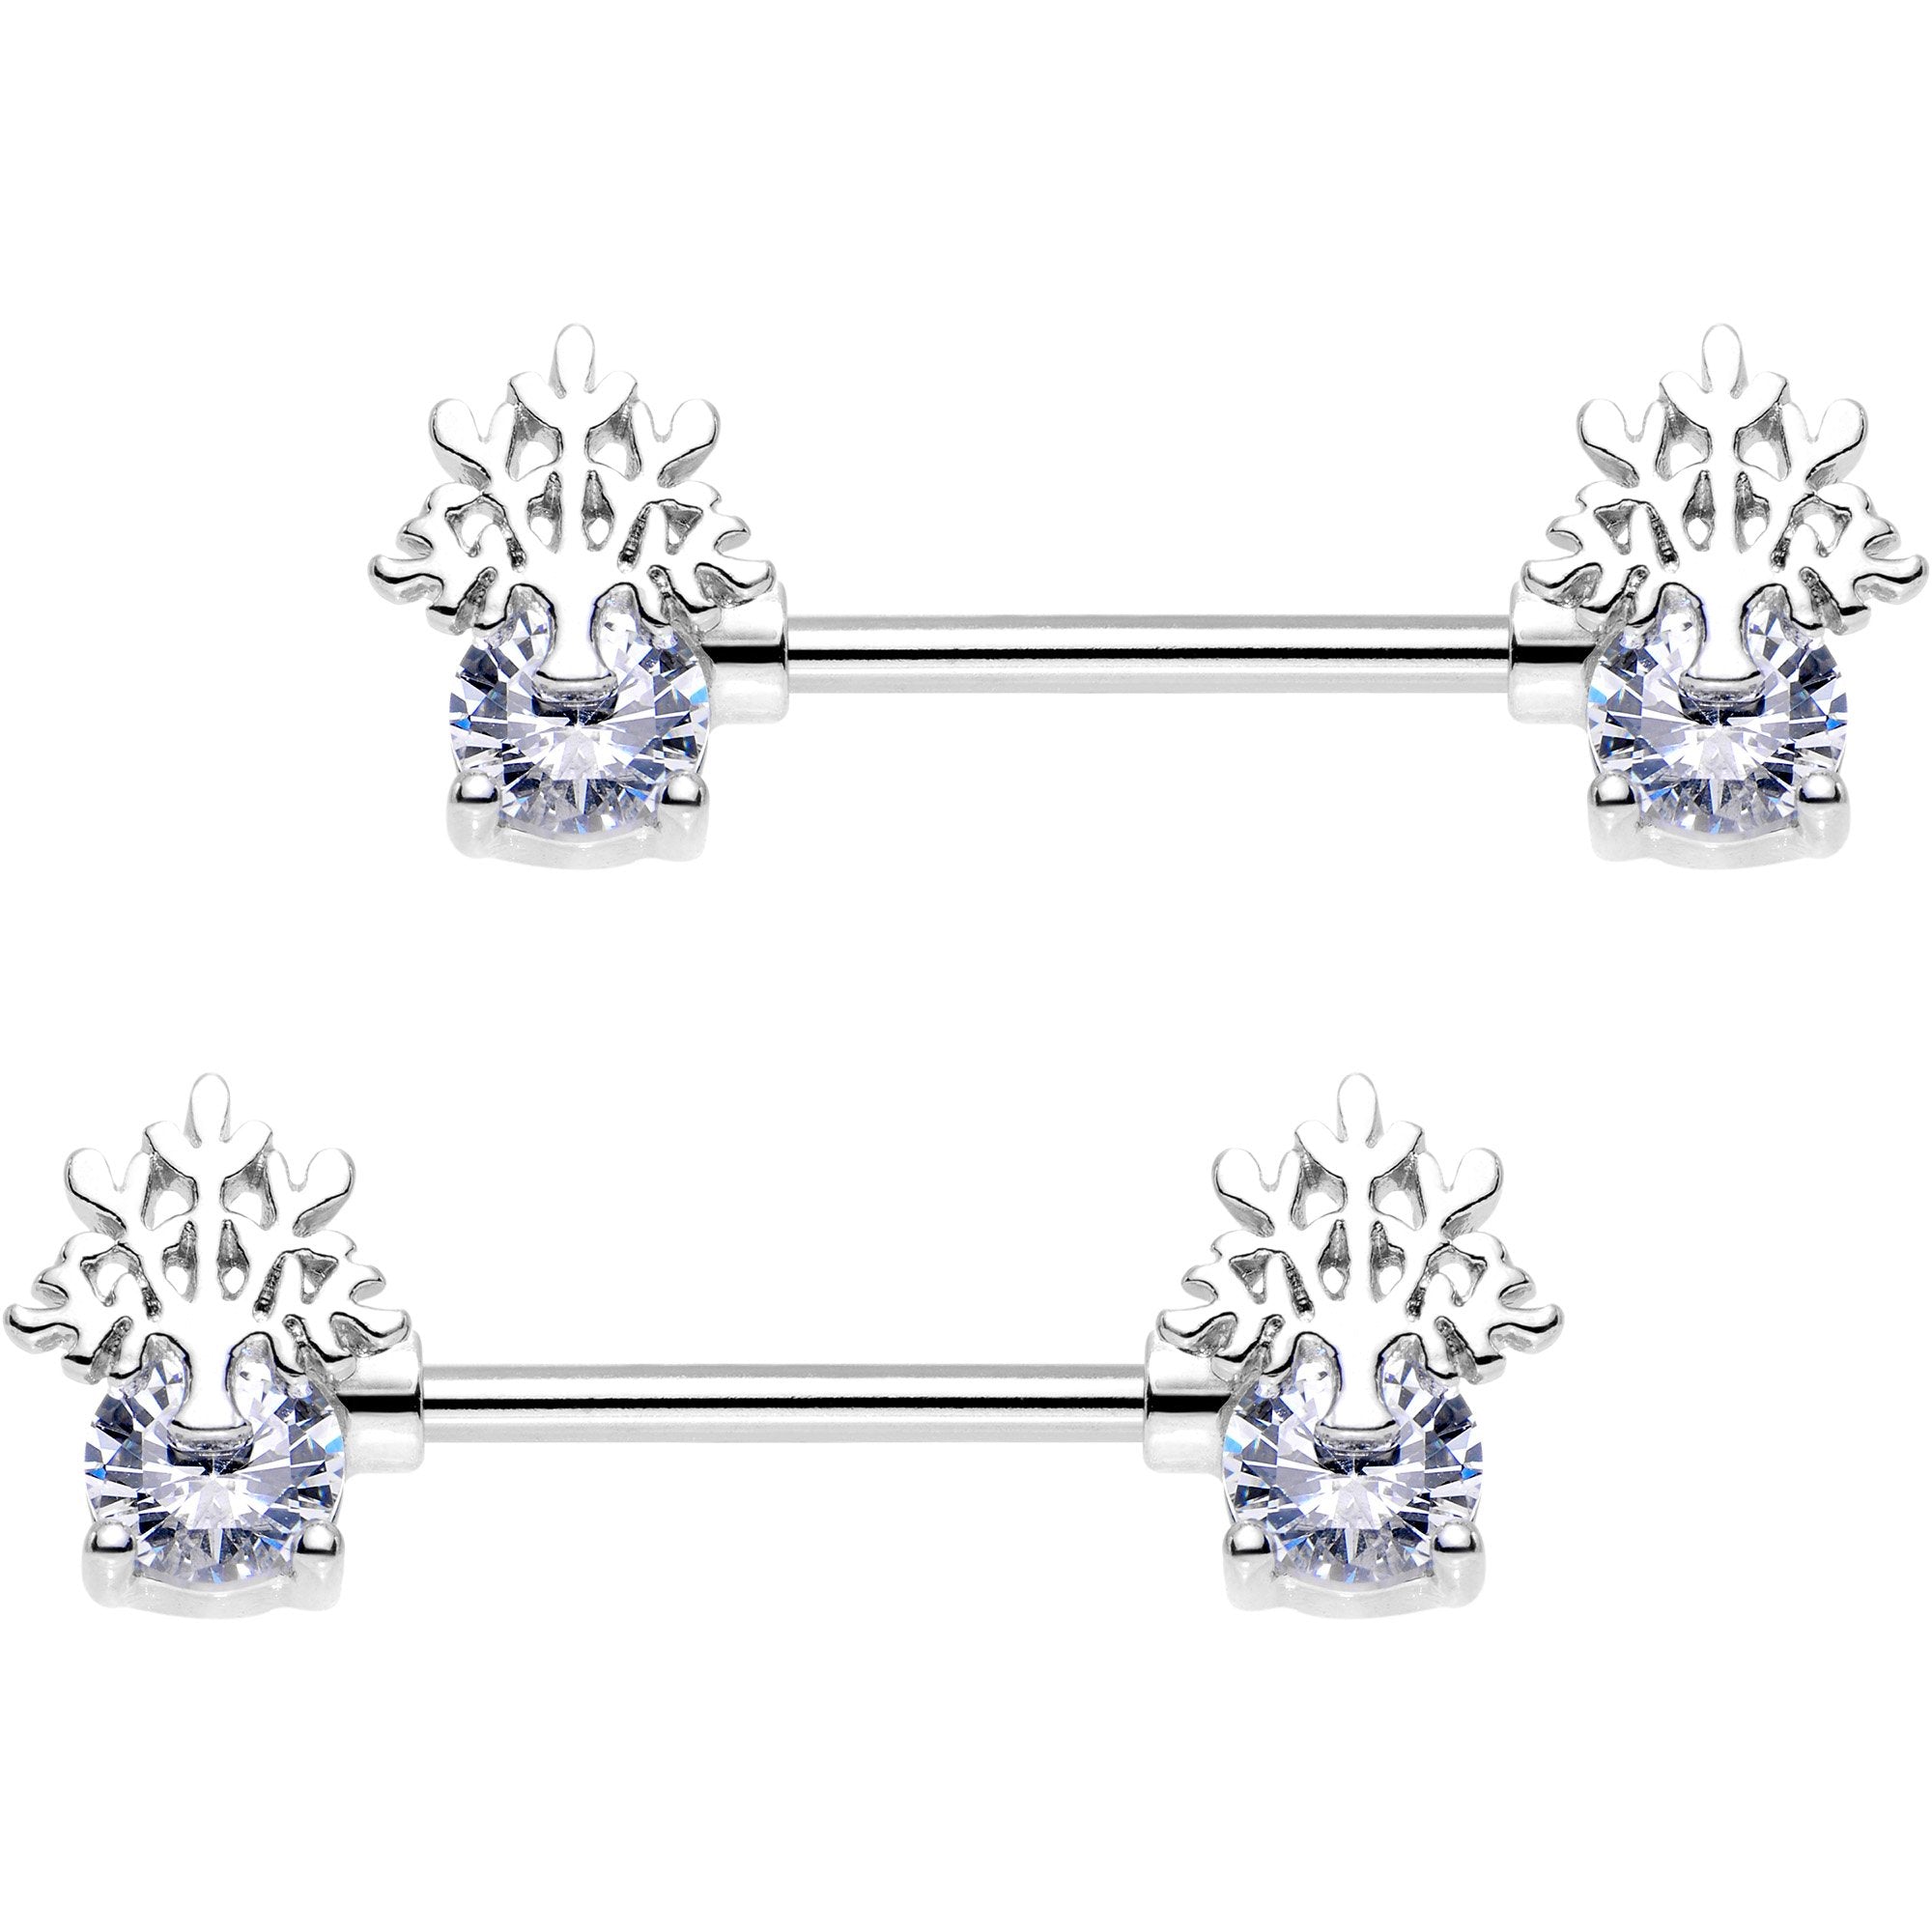 9/16 Clear Gem Heavenly Tree of Life Barbell Nipple Ring Set